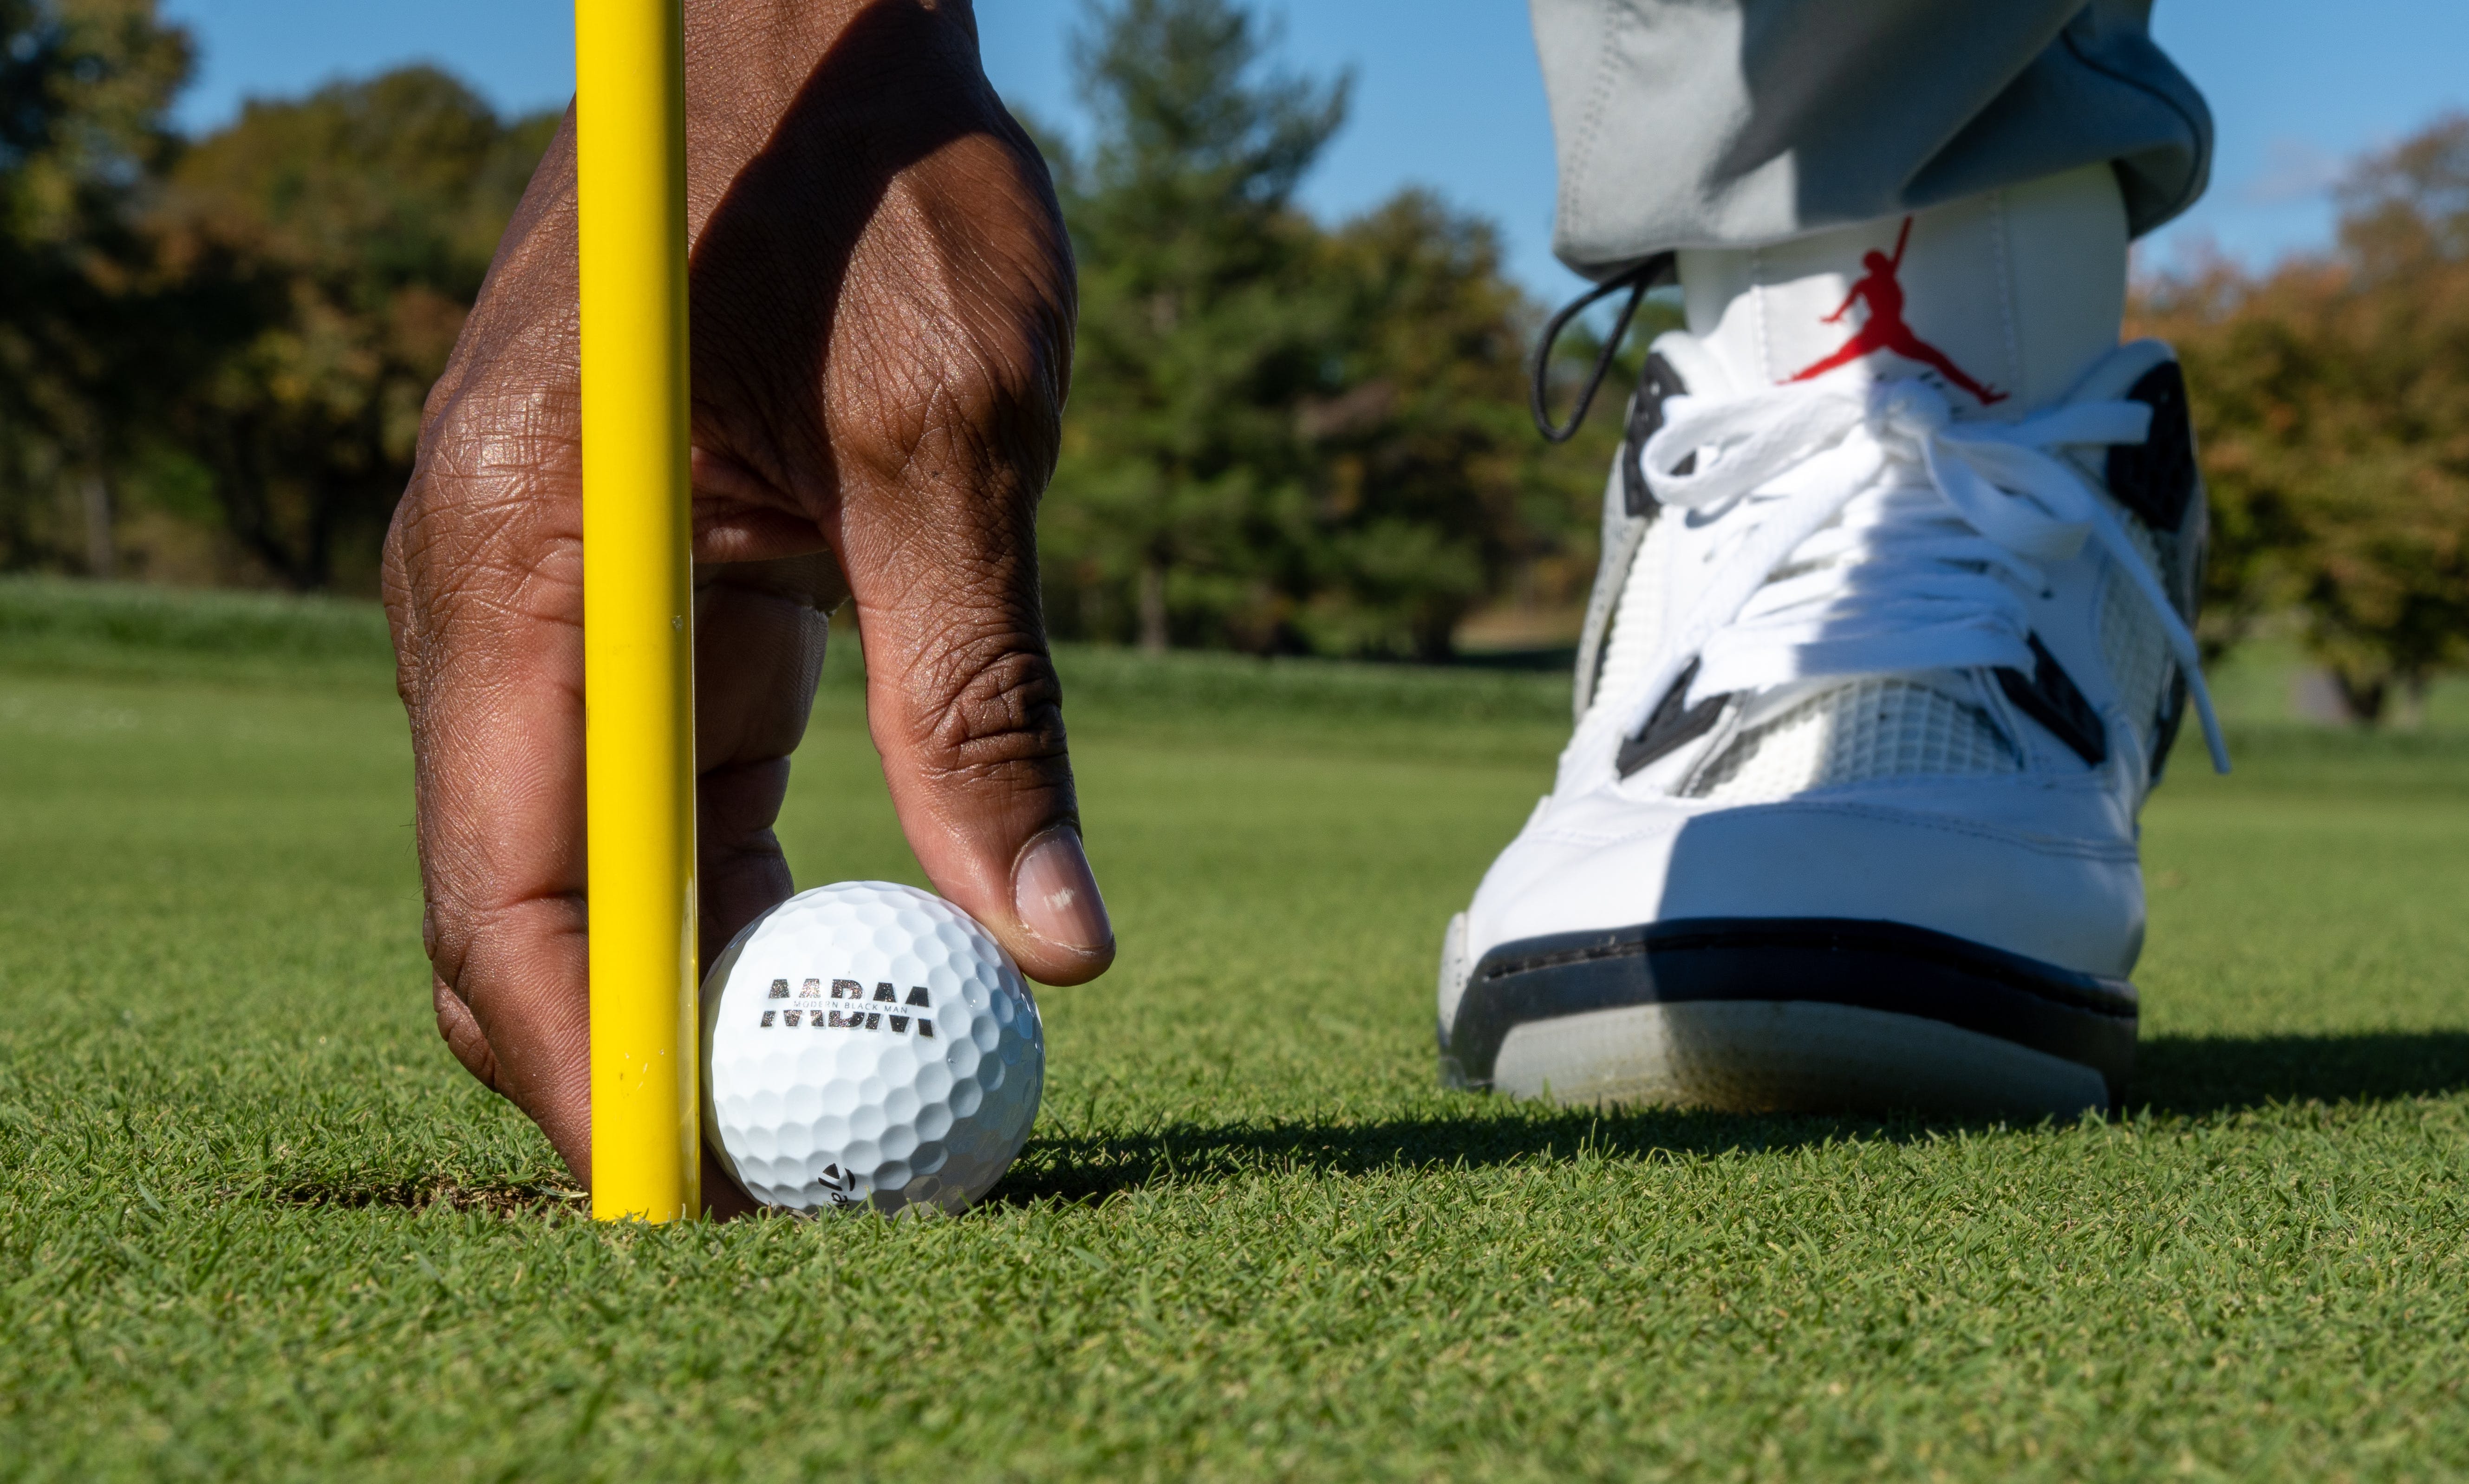 A person playing golf. | Source: Pexels